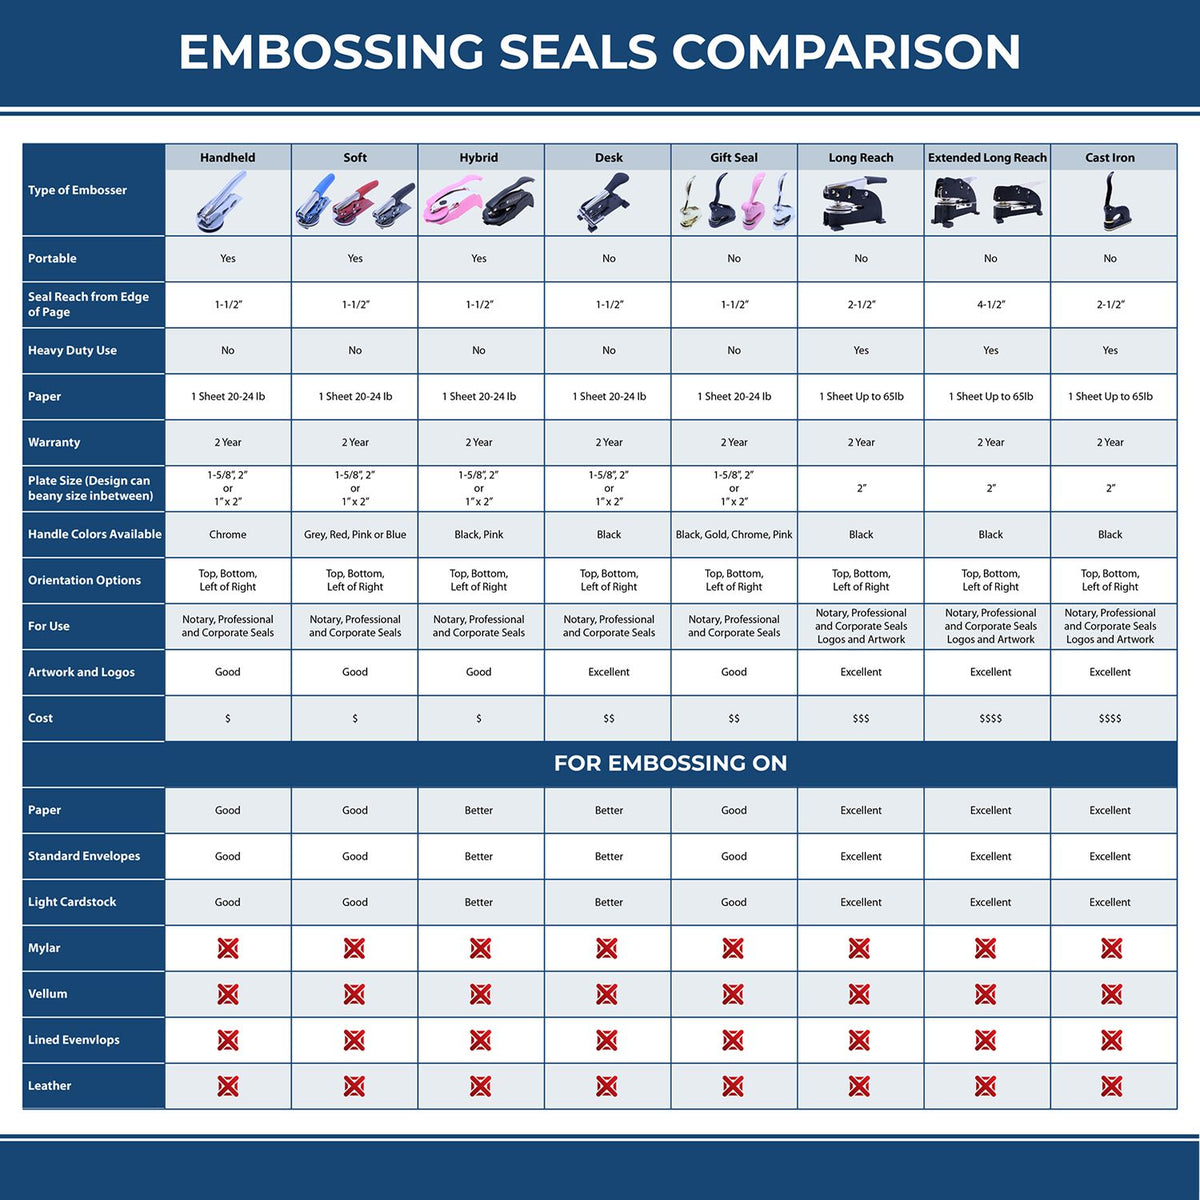 A comparison chart for the different types of mount models available for the Handheld Texas Architect Seal Embosser.